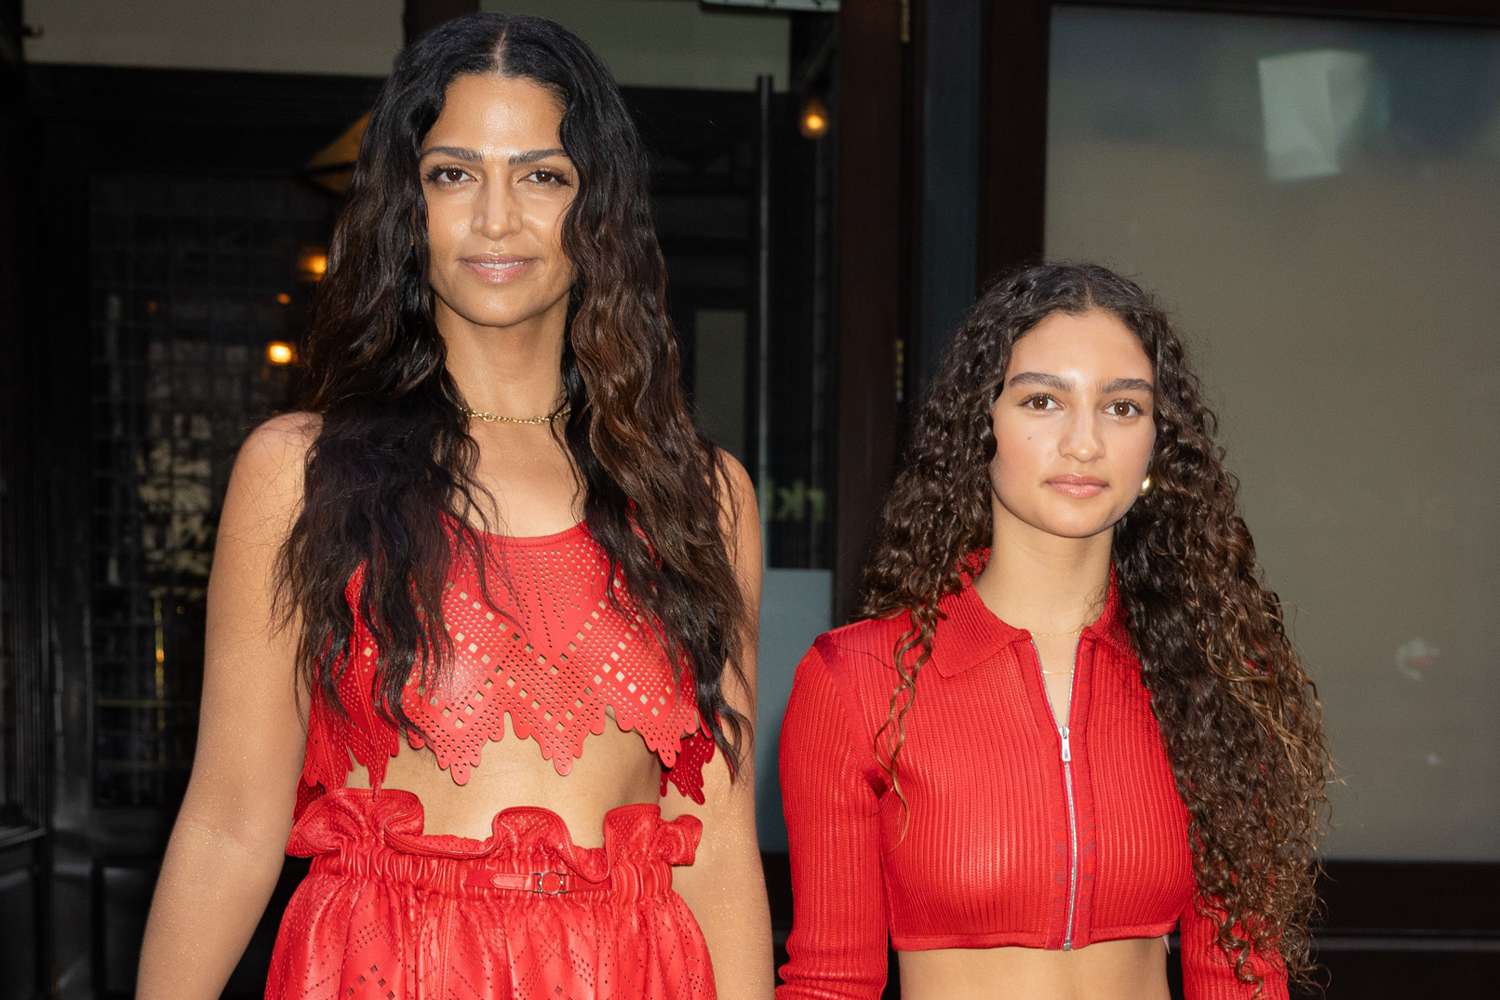 Matthew McConaughey’s Wife Camila Alves and Daughter Vida, 14, Radiate in Red Looks at N.Y.C. Hermès Event